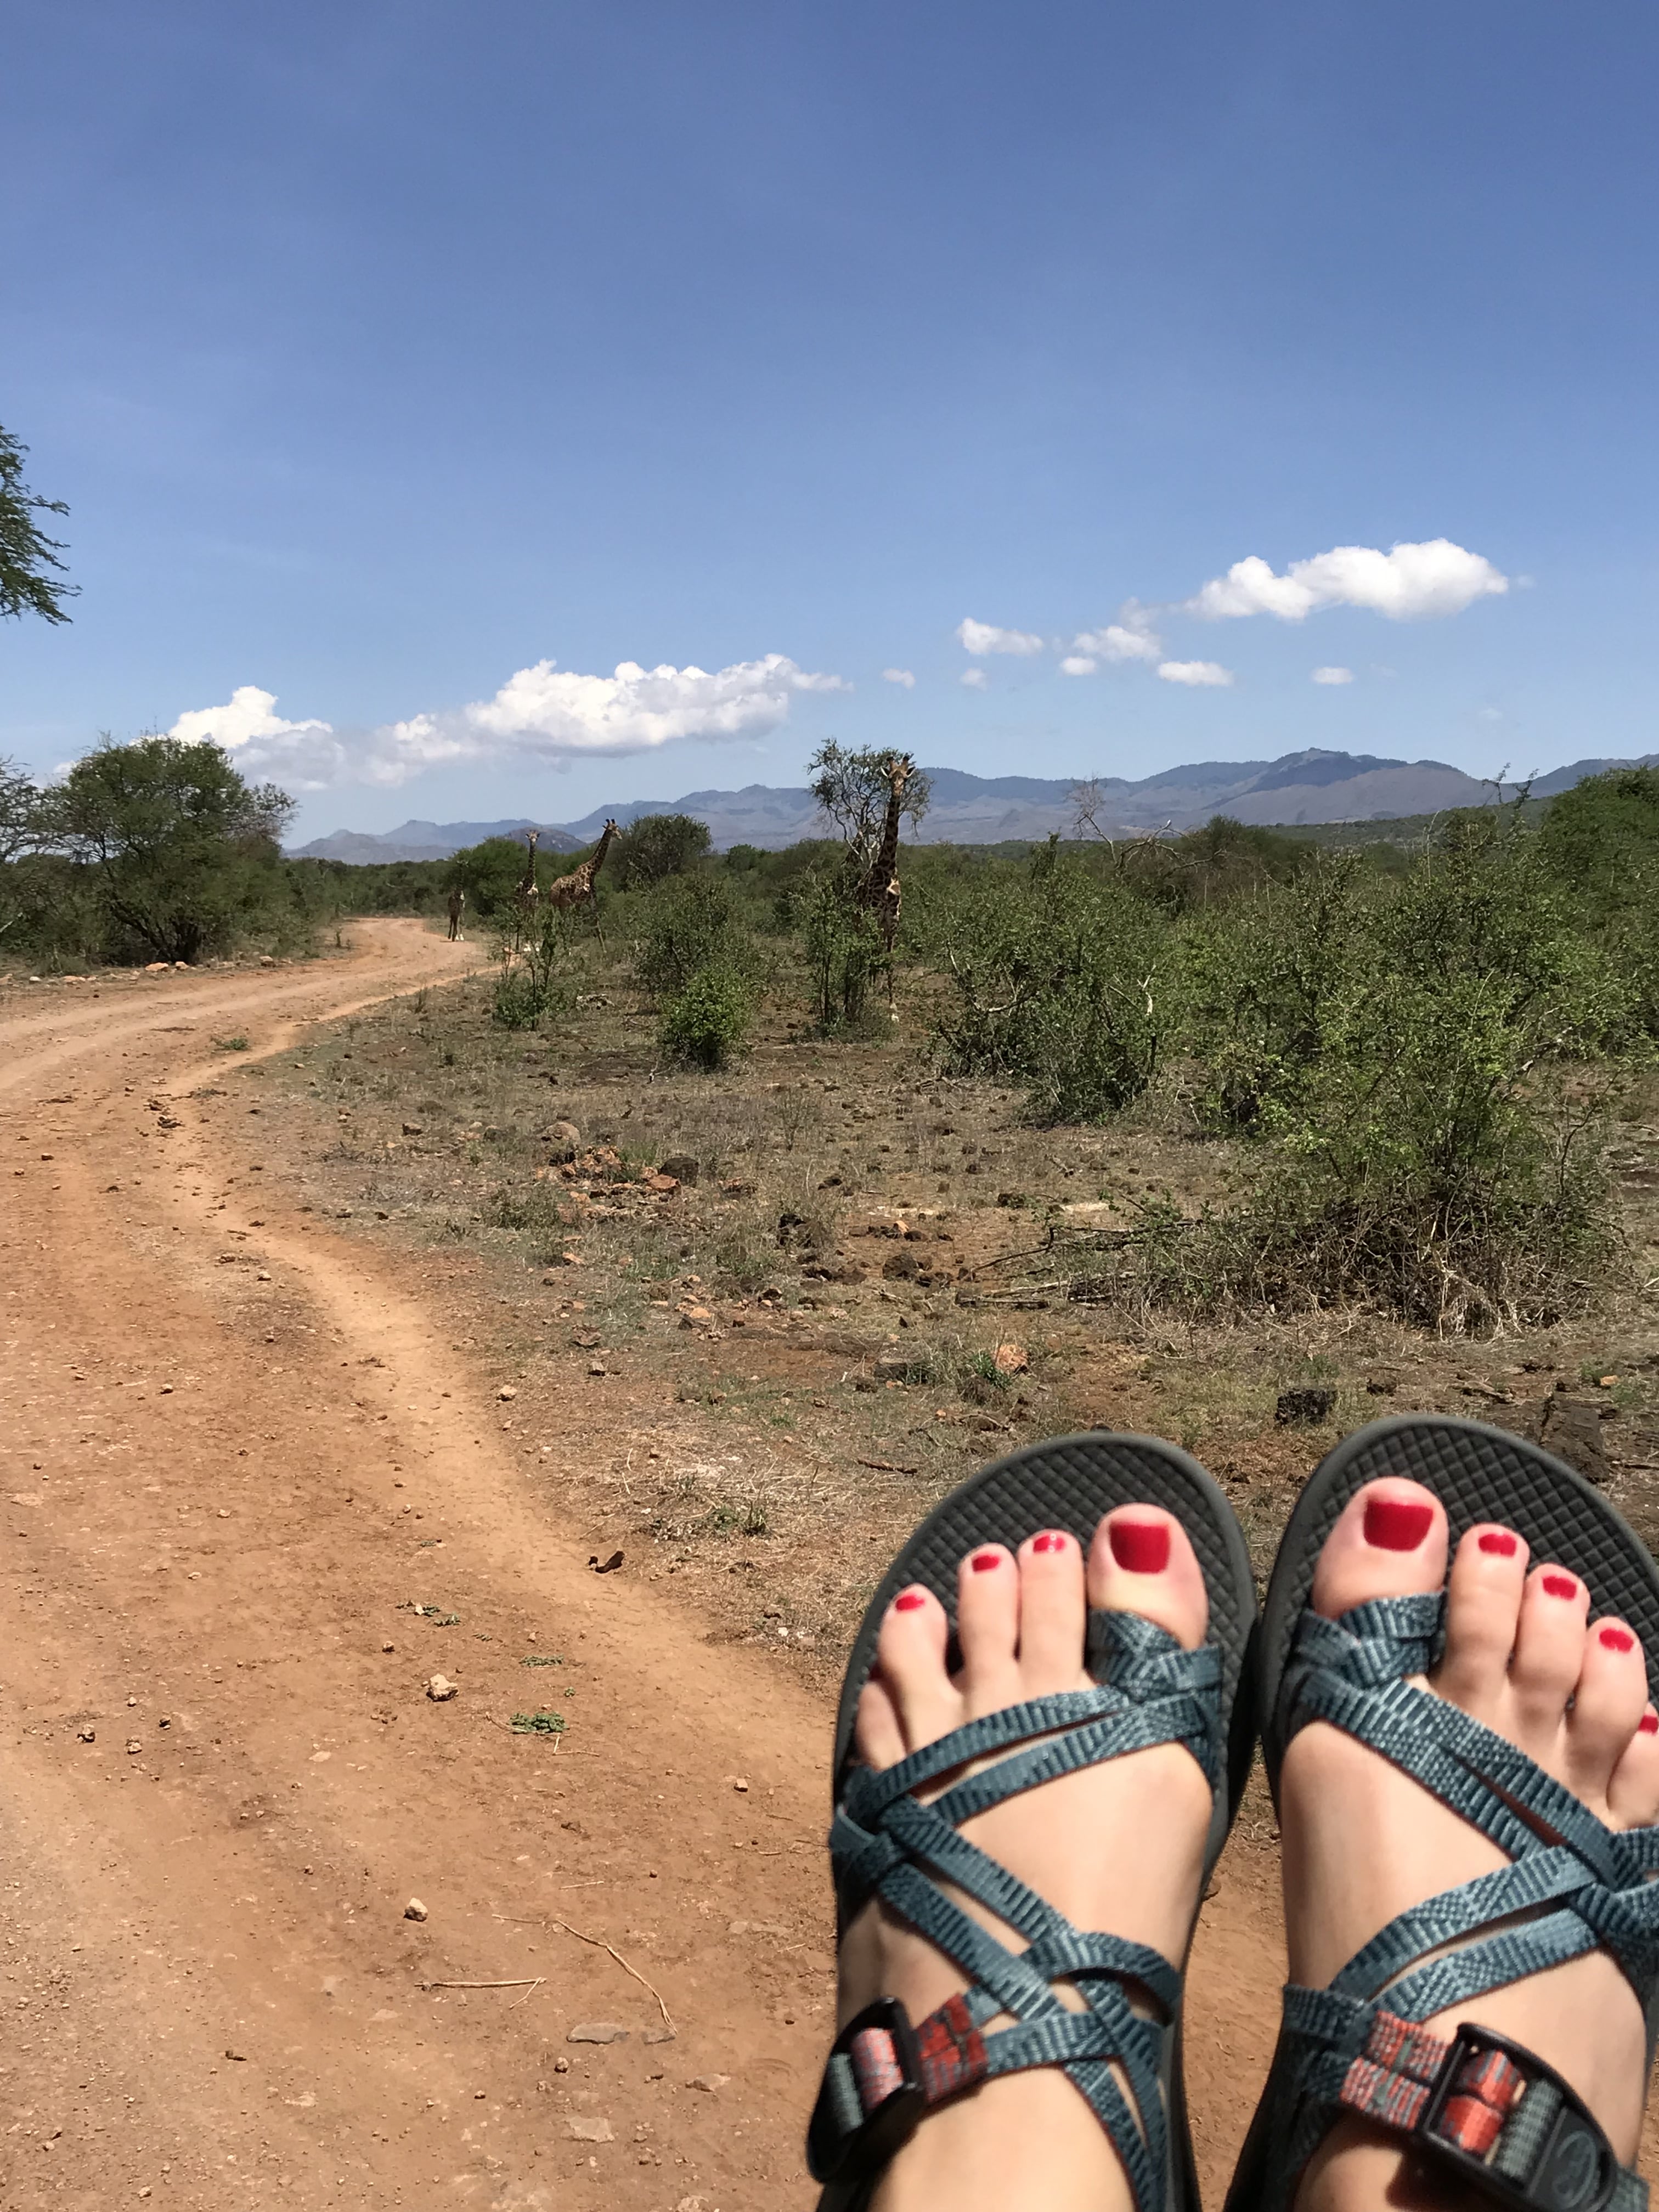 6 Reasons Why Chacos Should Be Your Next Shoe Purchase - Chacos - Chaco Sandals - Womens Chacos - Chaco Footwear - Womens Chacos Sandals - Chacos Sandals Review - Are Chacos Comfortable - Ladies Chacos - Chacos Sale - www.chacos.com - #chacos #travelblog